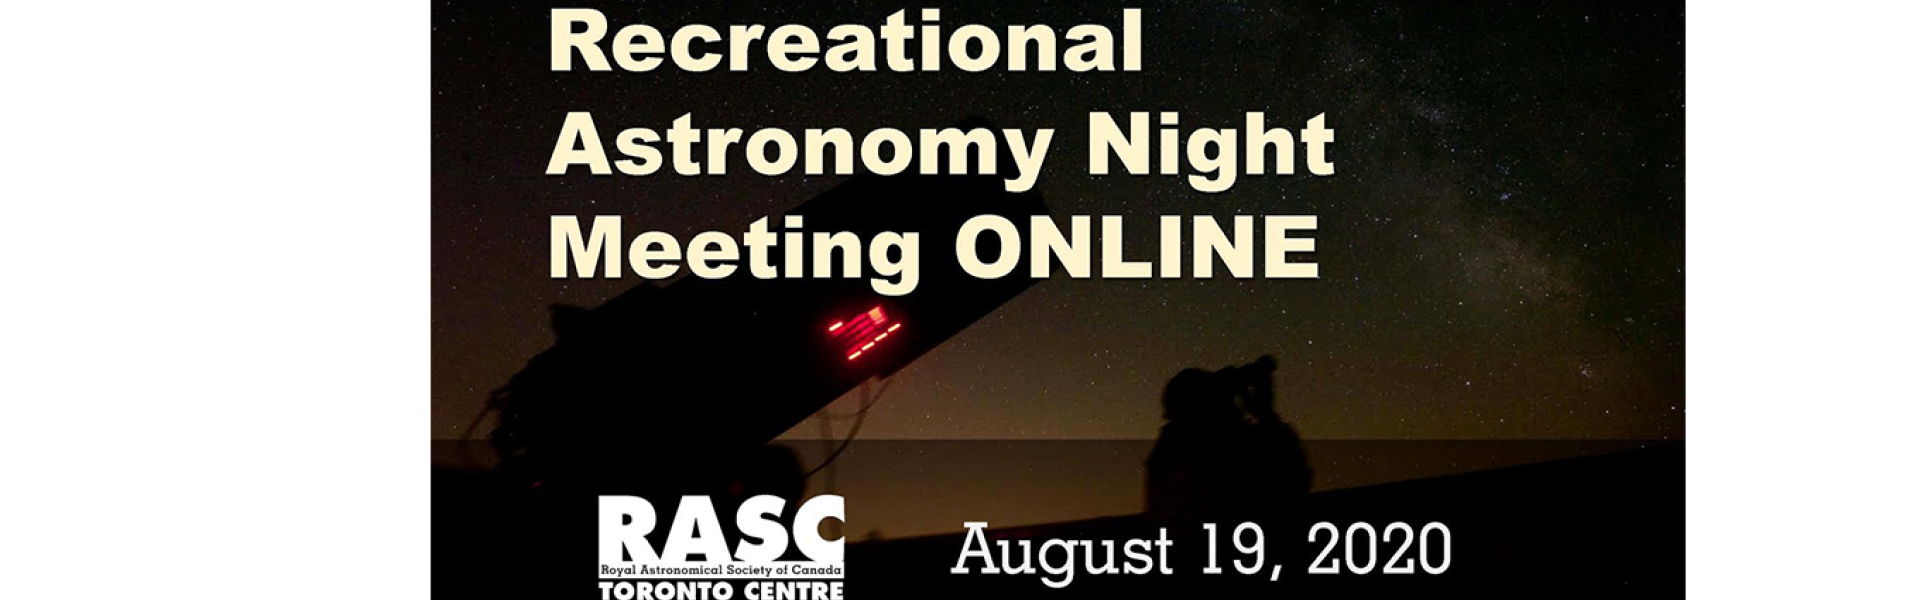 Recreational Astronomy Night ONLINE - August 19, 2020